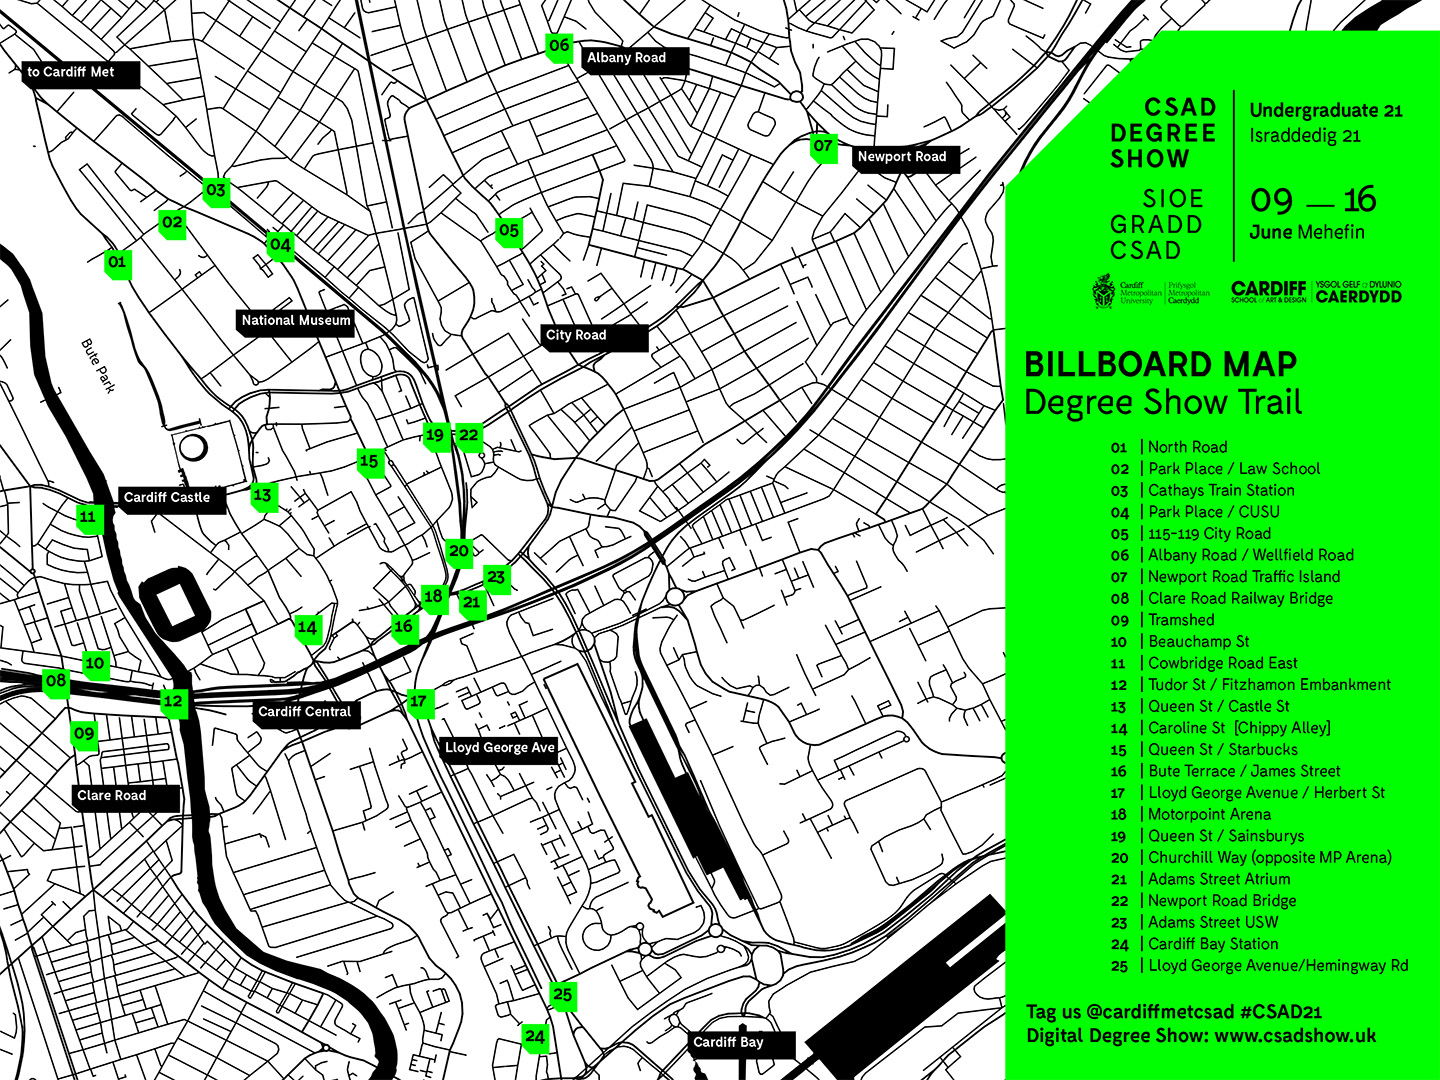 Degree Show Billboard Posters Map of Cardiff City centre sowing the locations